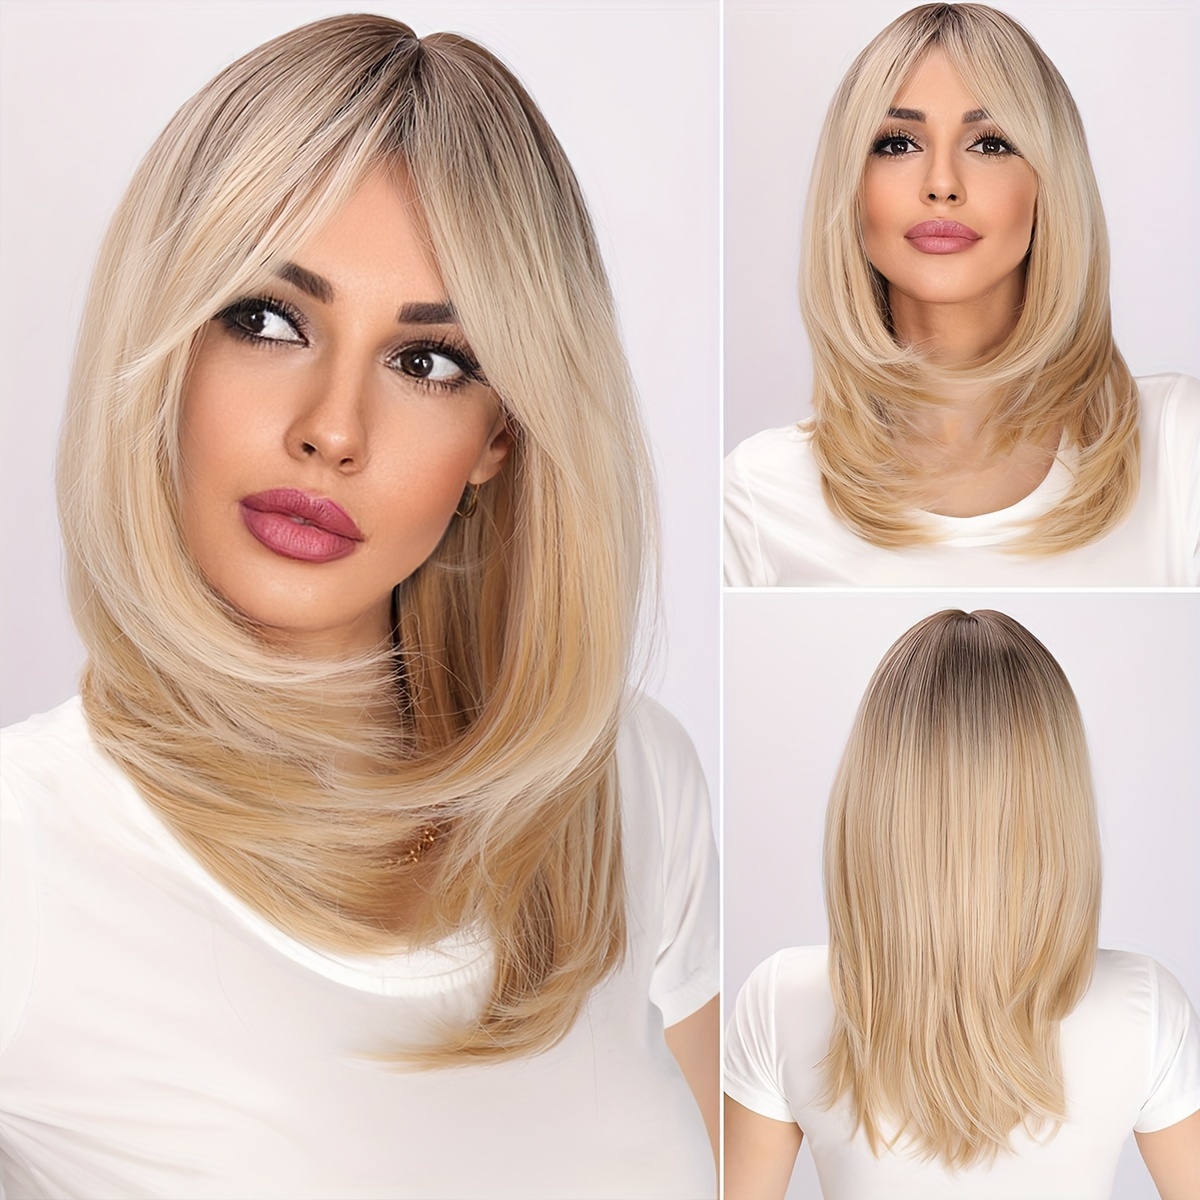 

Golden Banged Wig - Women's Natural Synthetic Synthetic Synthetic Wig - Realistic Wig -20 Inch Fashionable Ideal Choice For Women And Girls, Heat-resistant, Suitable For Daily Wear And Parties